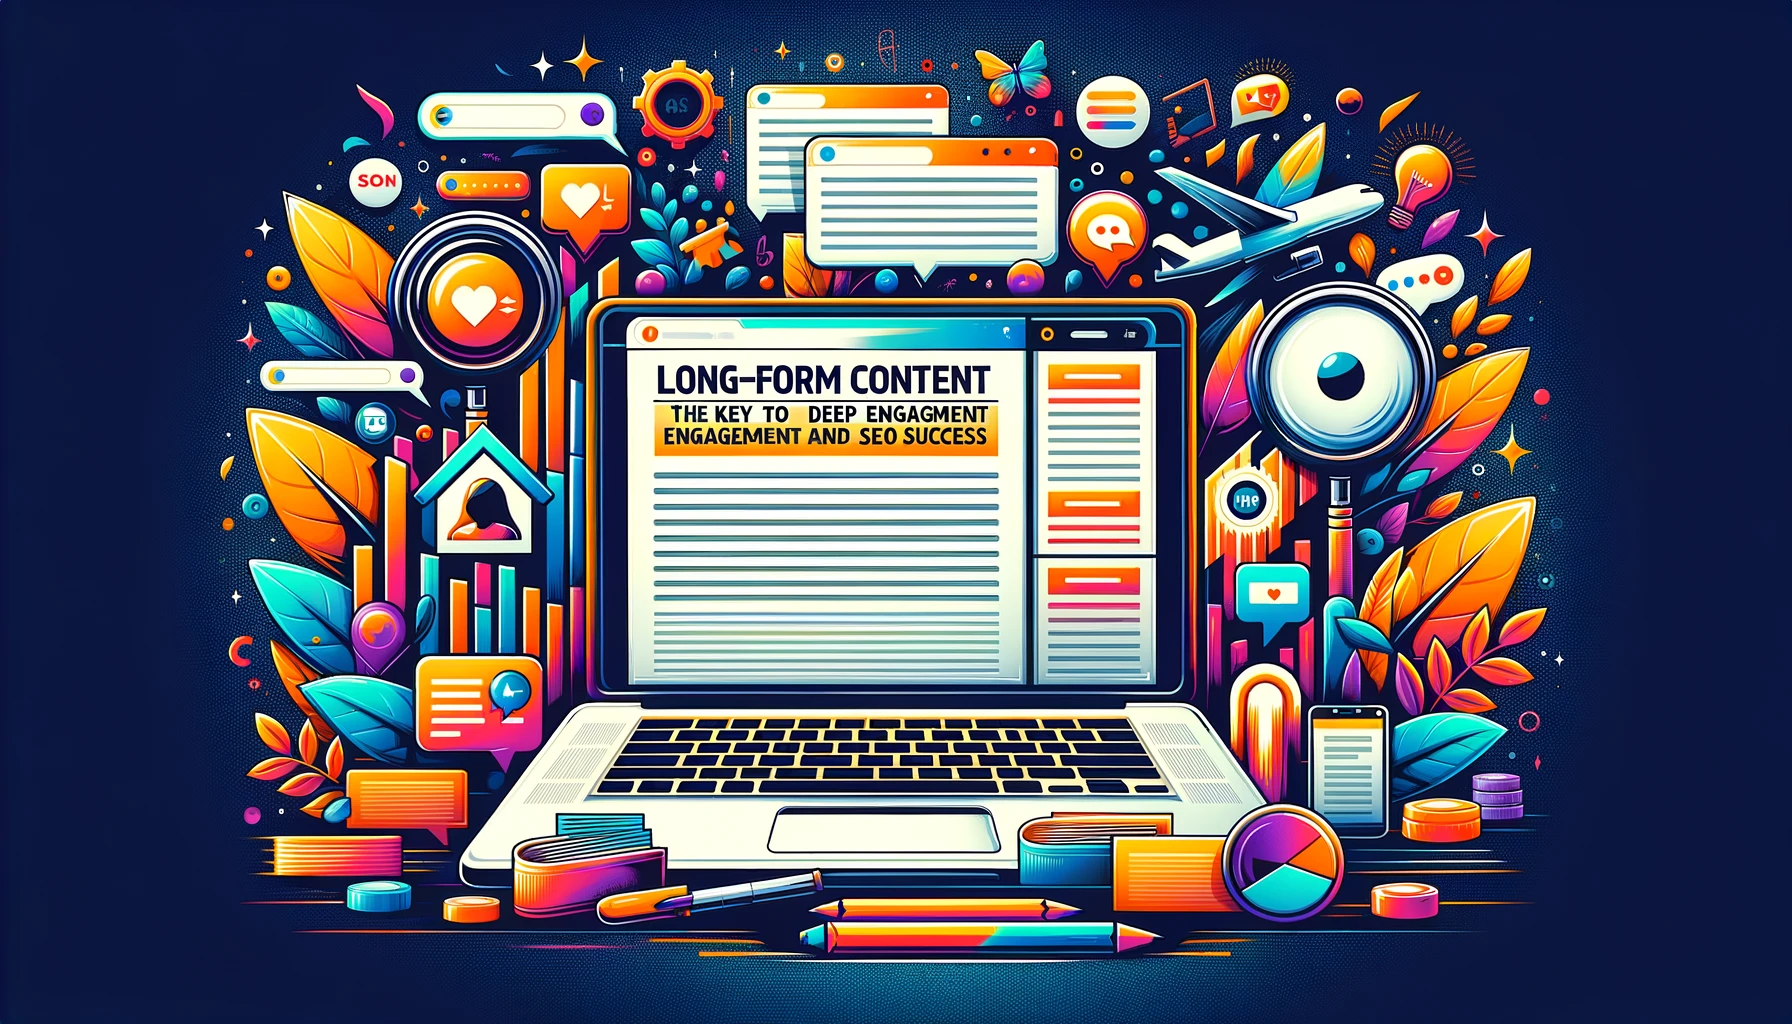 Long-Form Content: The Key to Deep Engagement and SEO Success